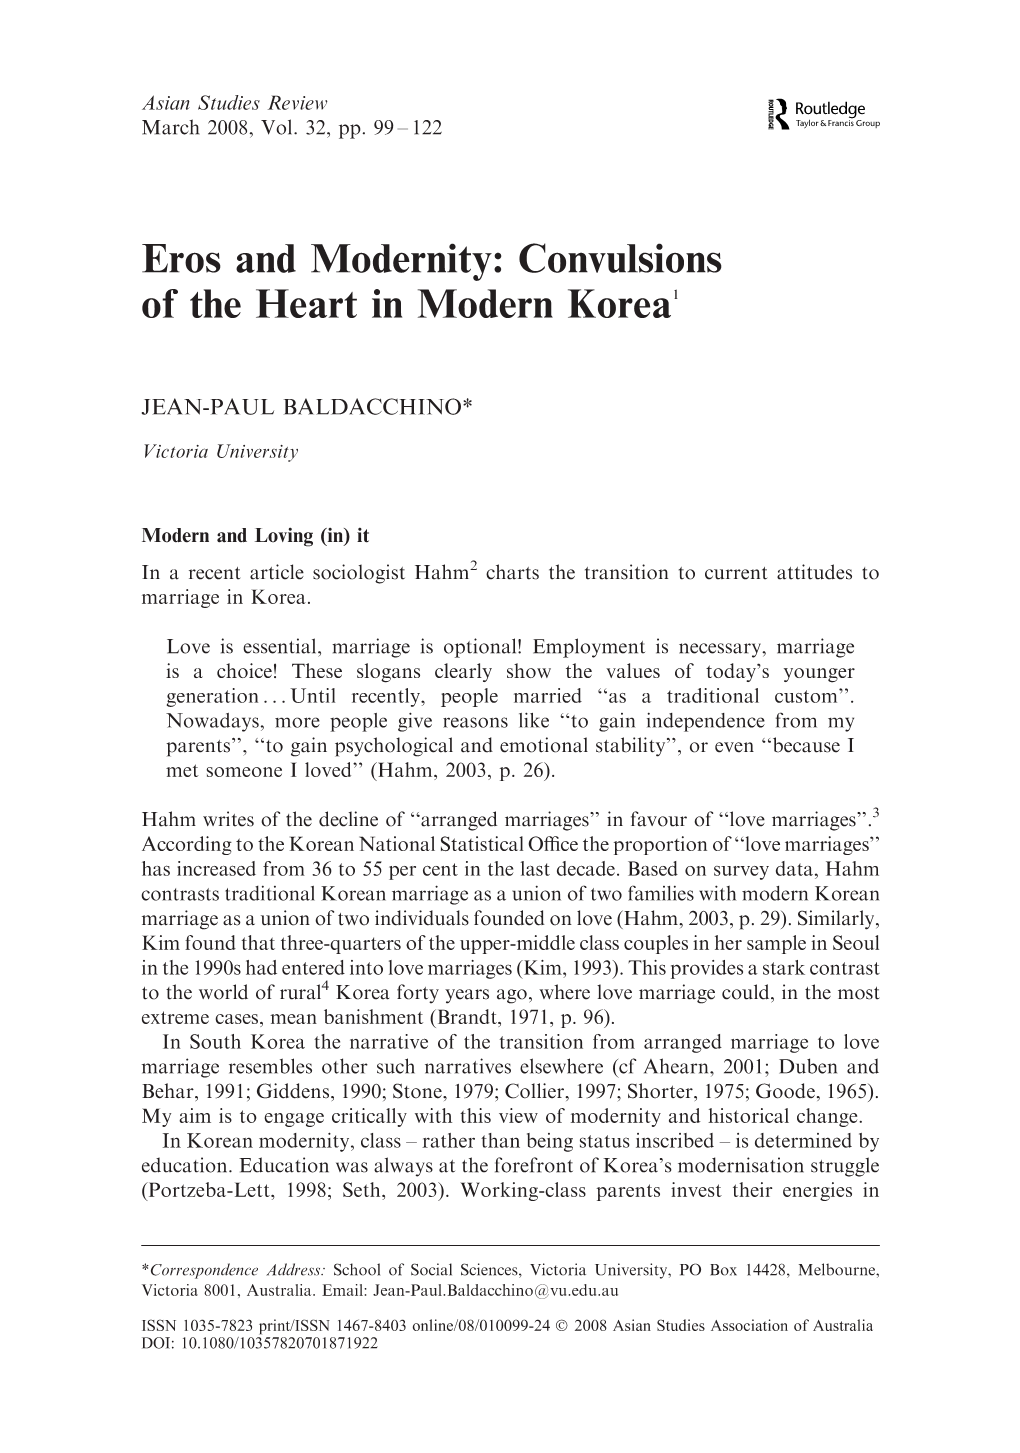 Eros and Modernity: Convulsions of the Heart in Modern Korea1